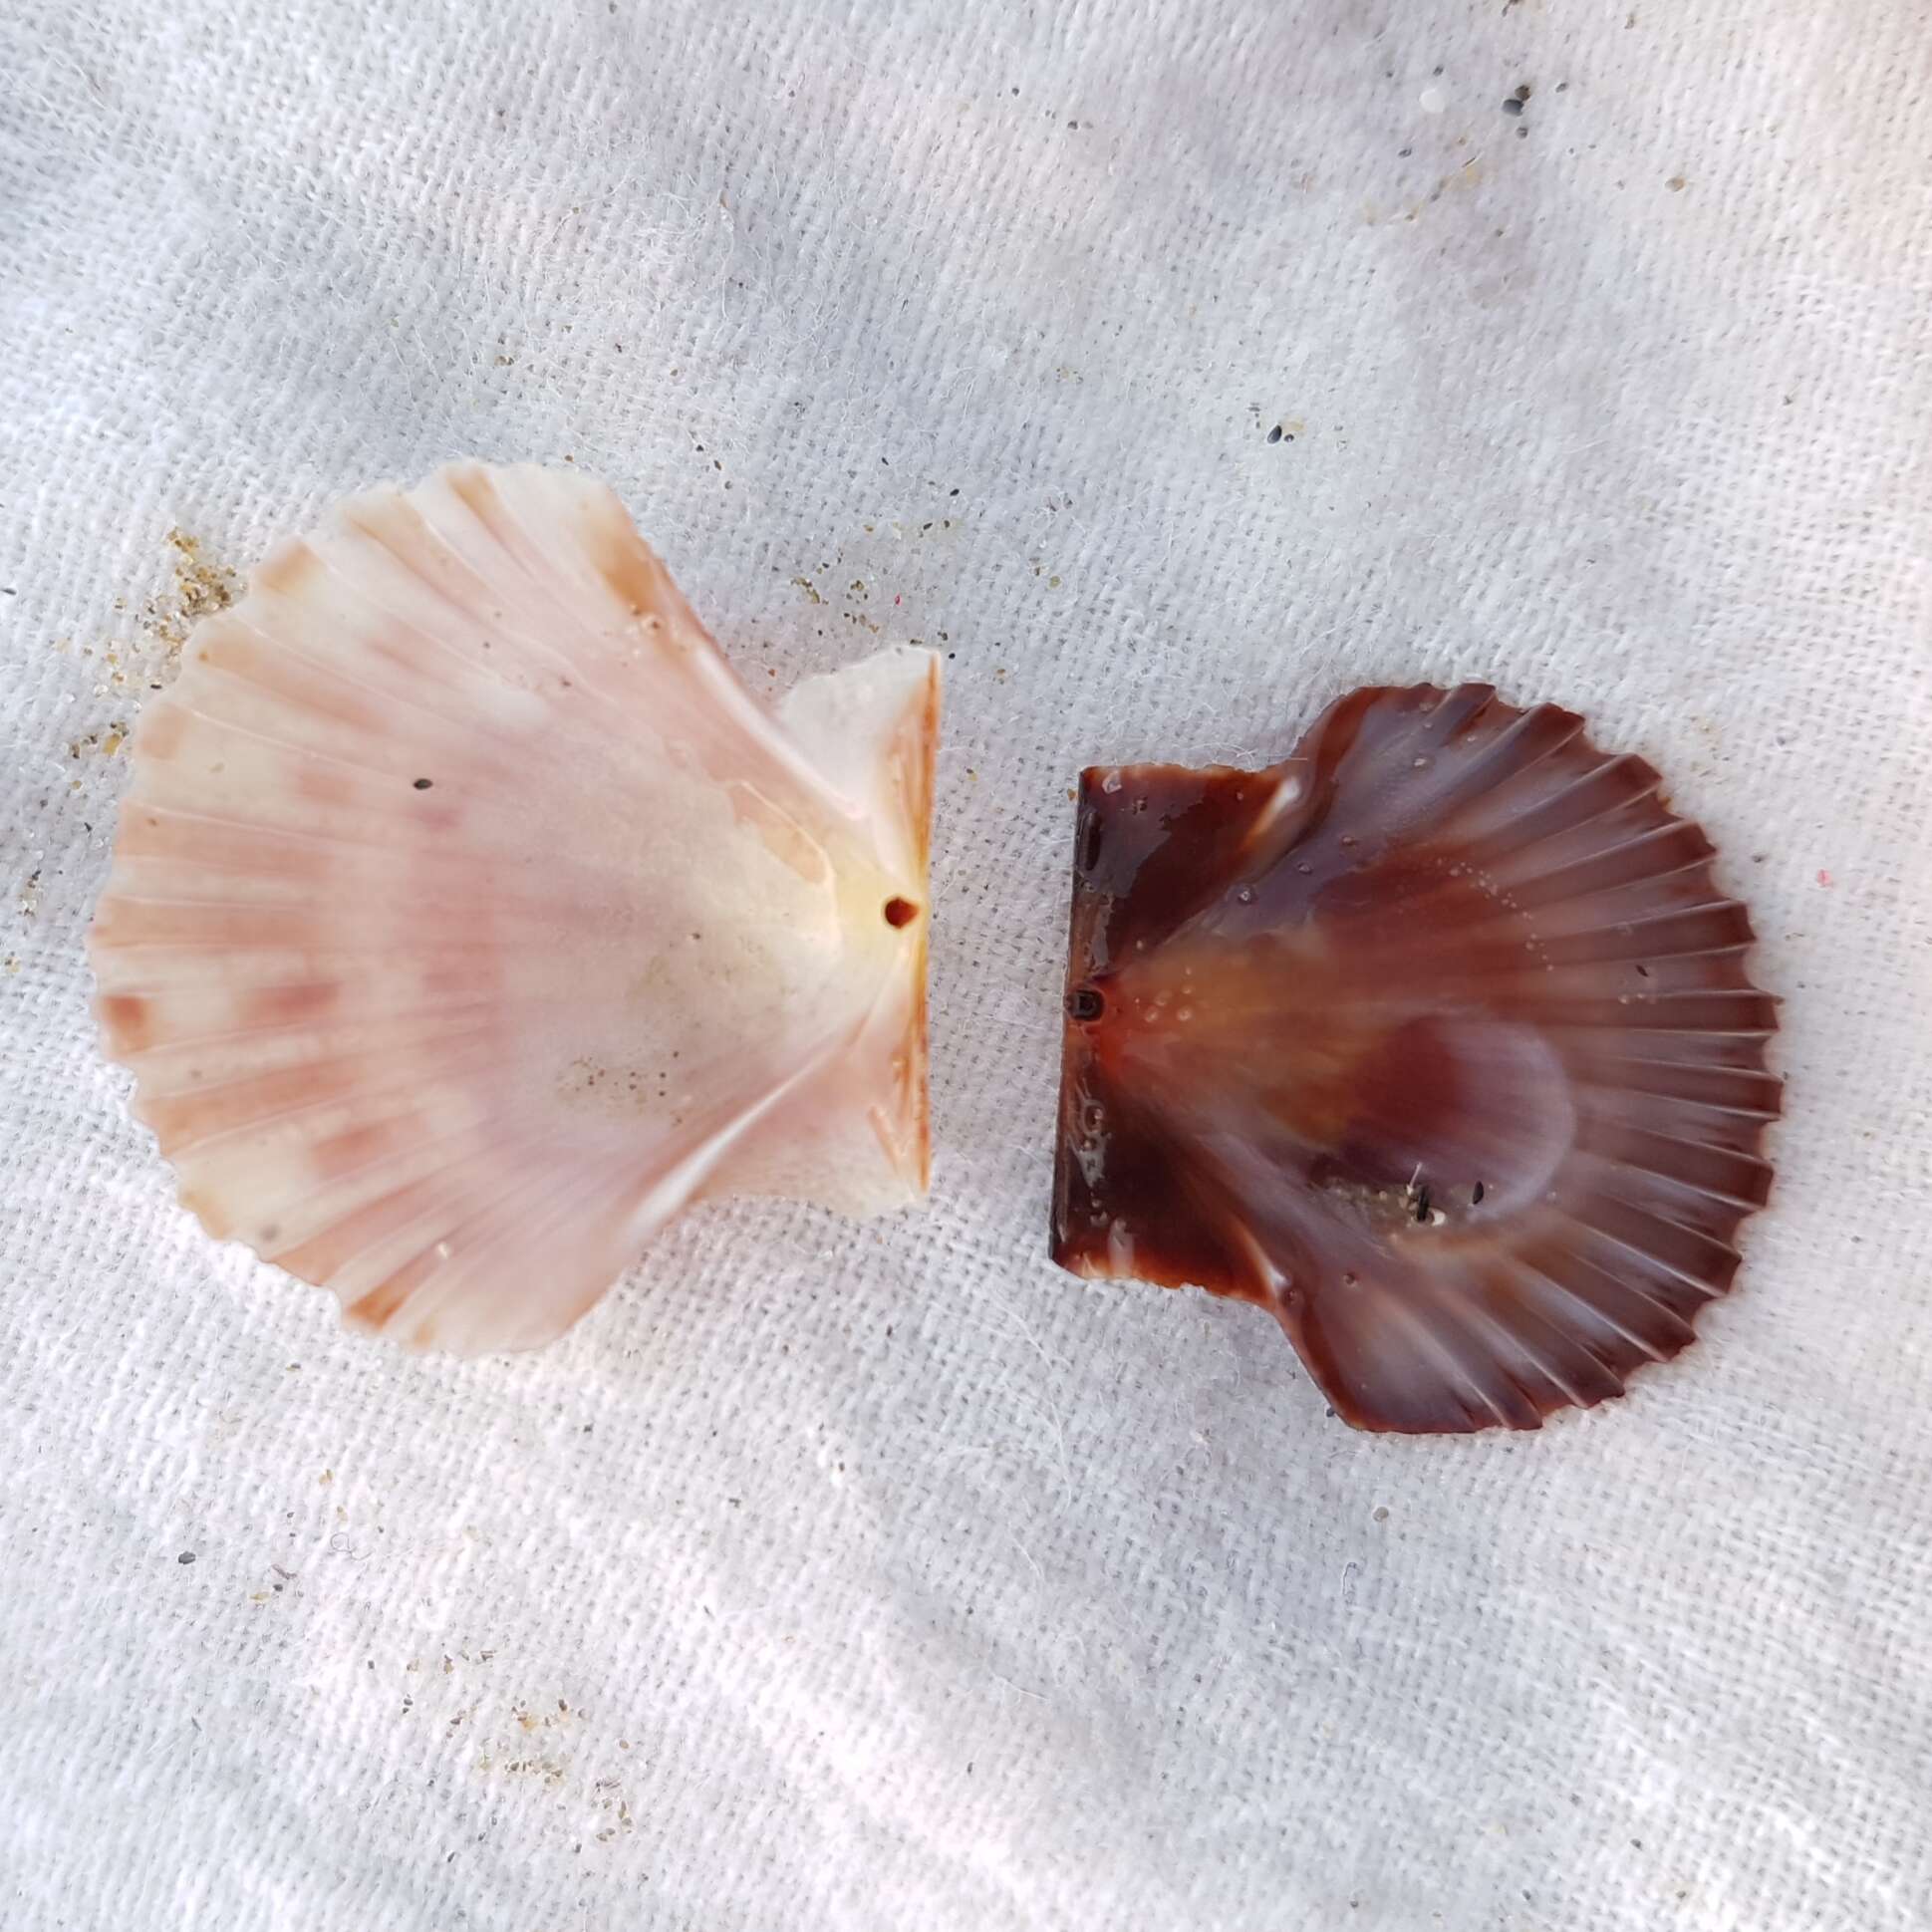 Image of St.James's scallop